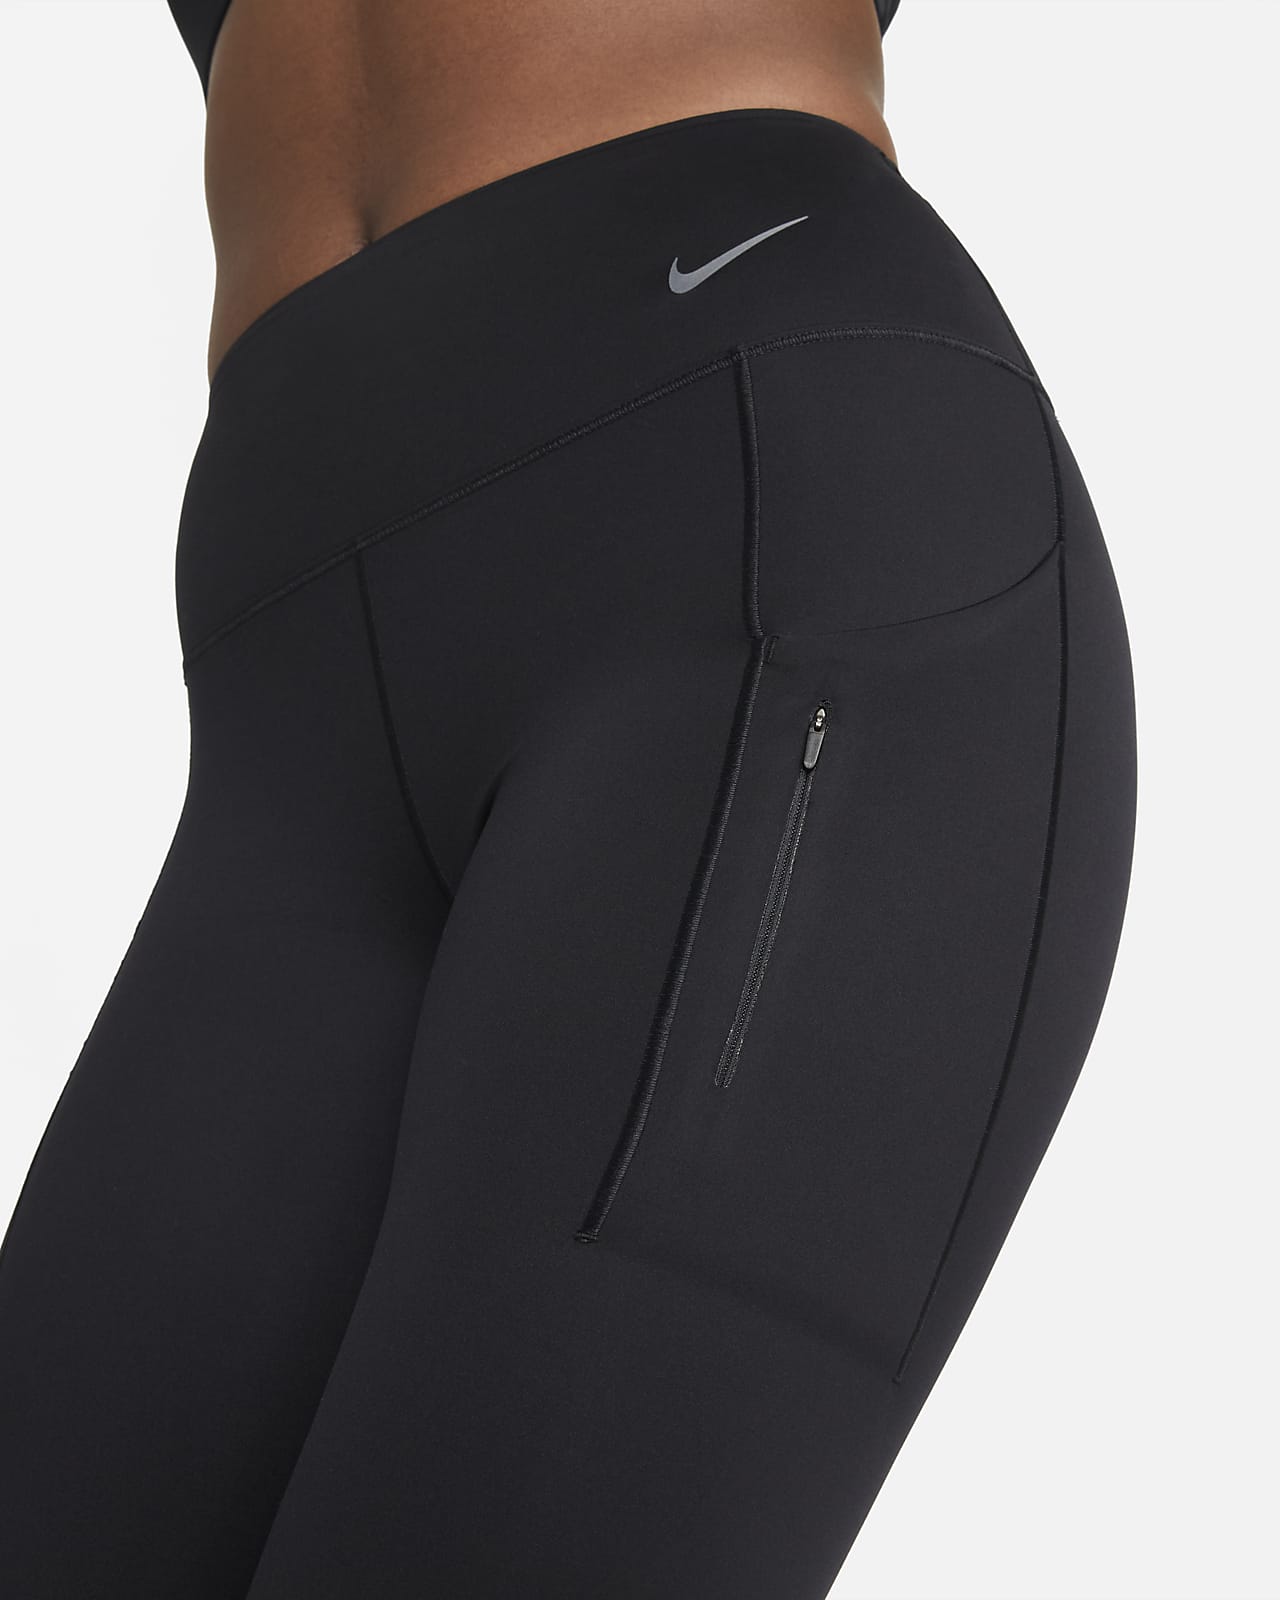 High Waisted Solid Leggings With Back Pockets – Zimmi Fit